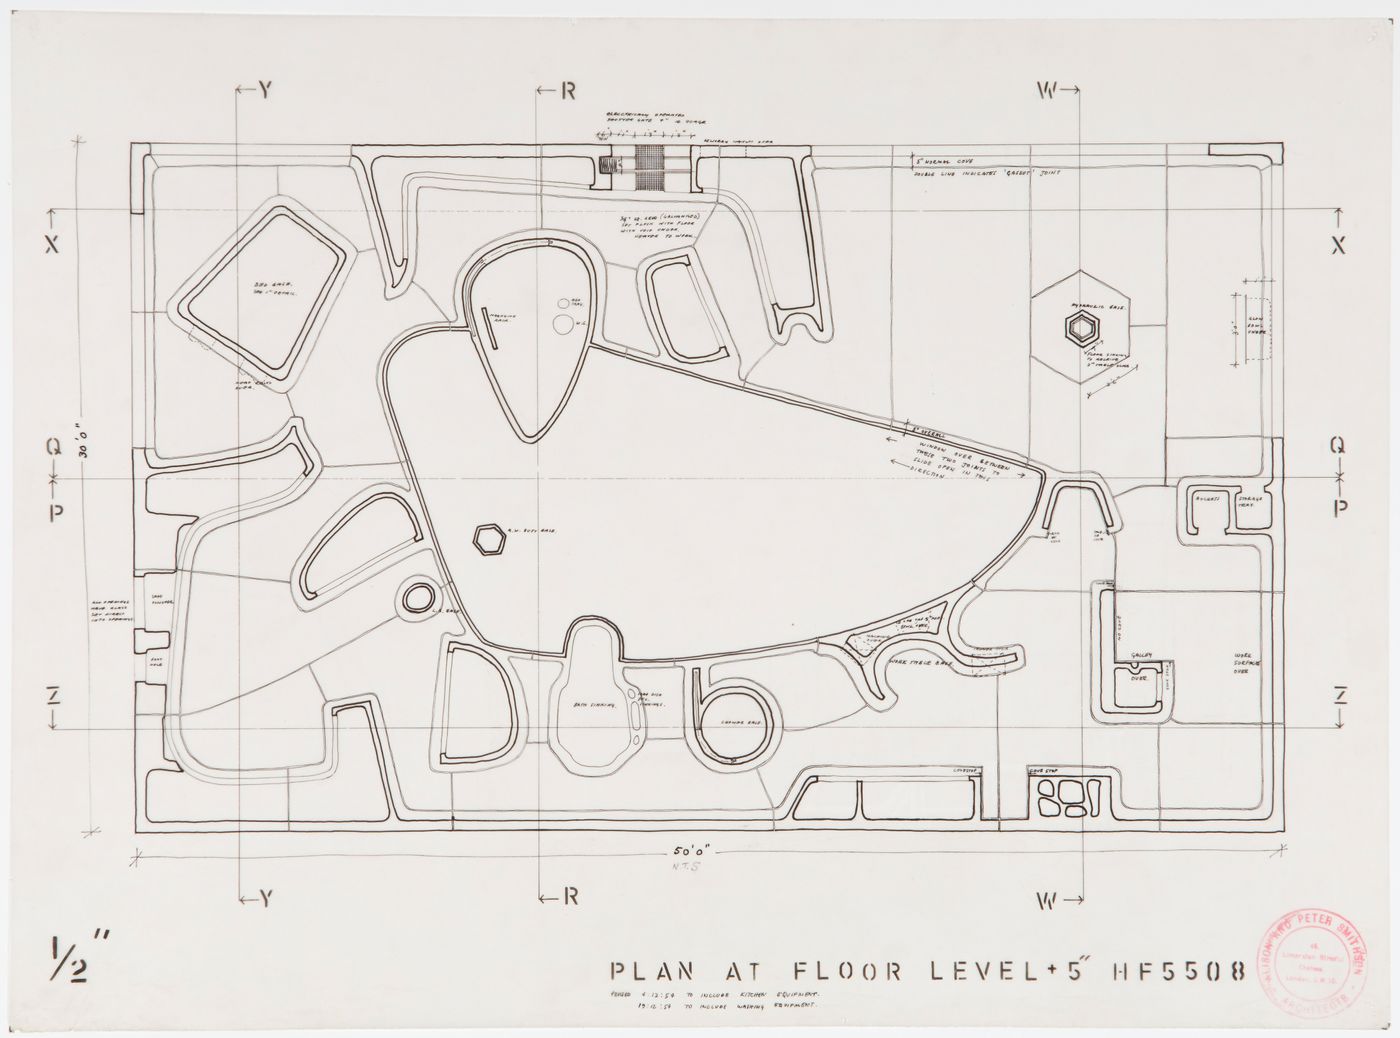 House of the Future, Daily Mail Ideal Homes Exhibition, London, England: plan for five inches above the floor level